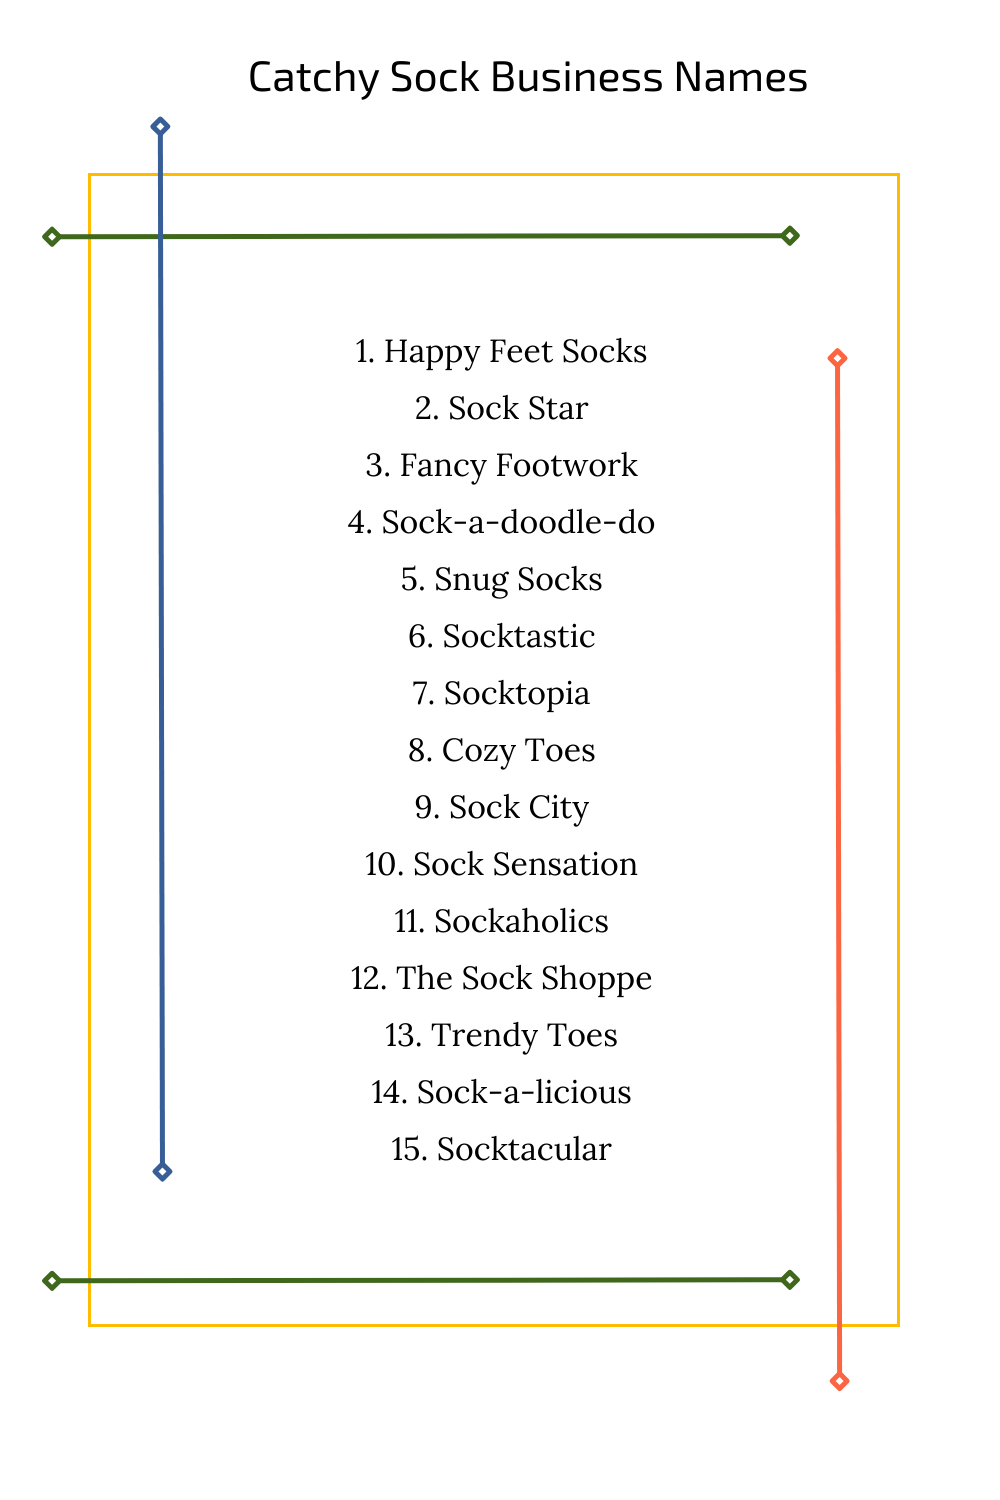 Catchy Sock Business Names